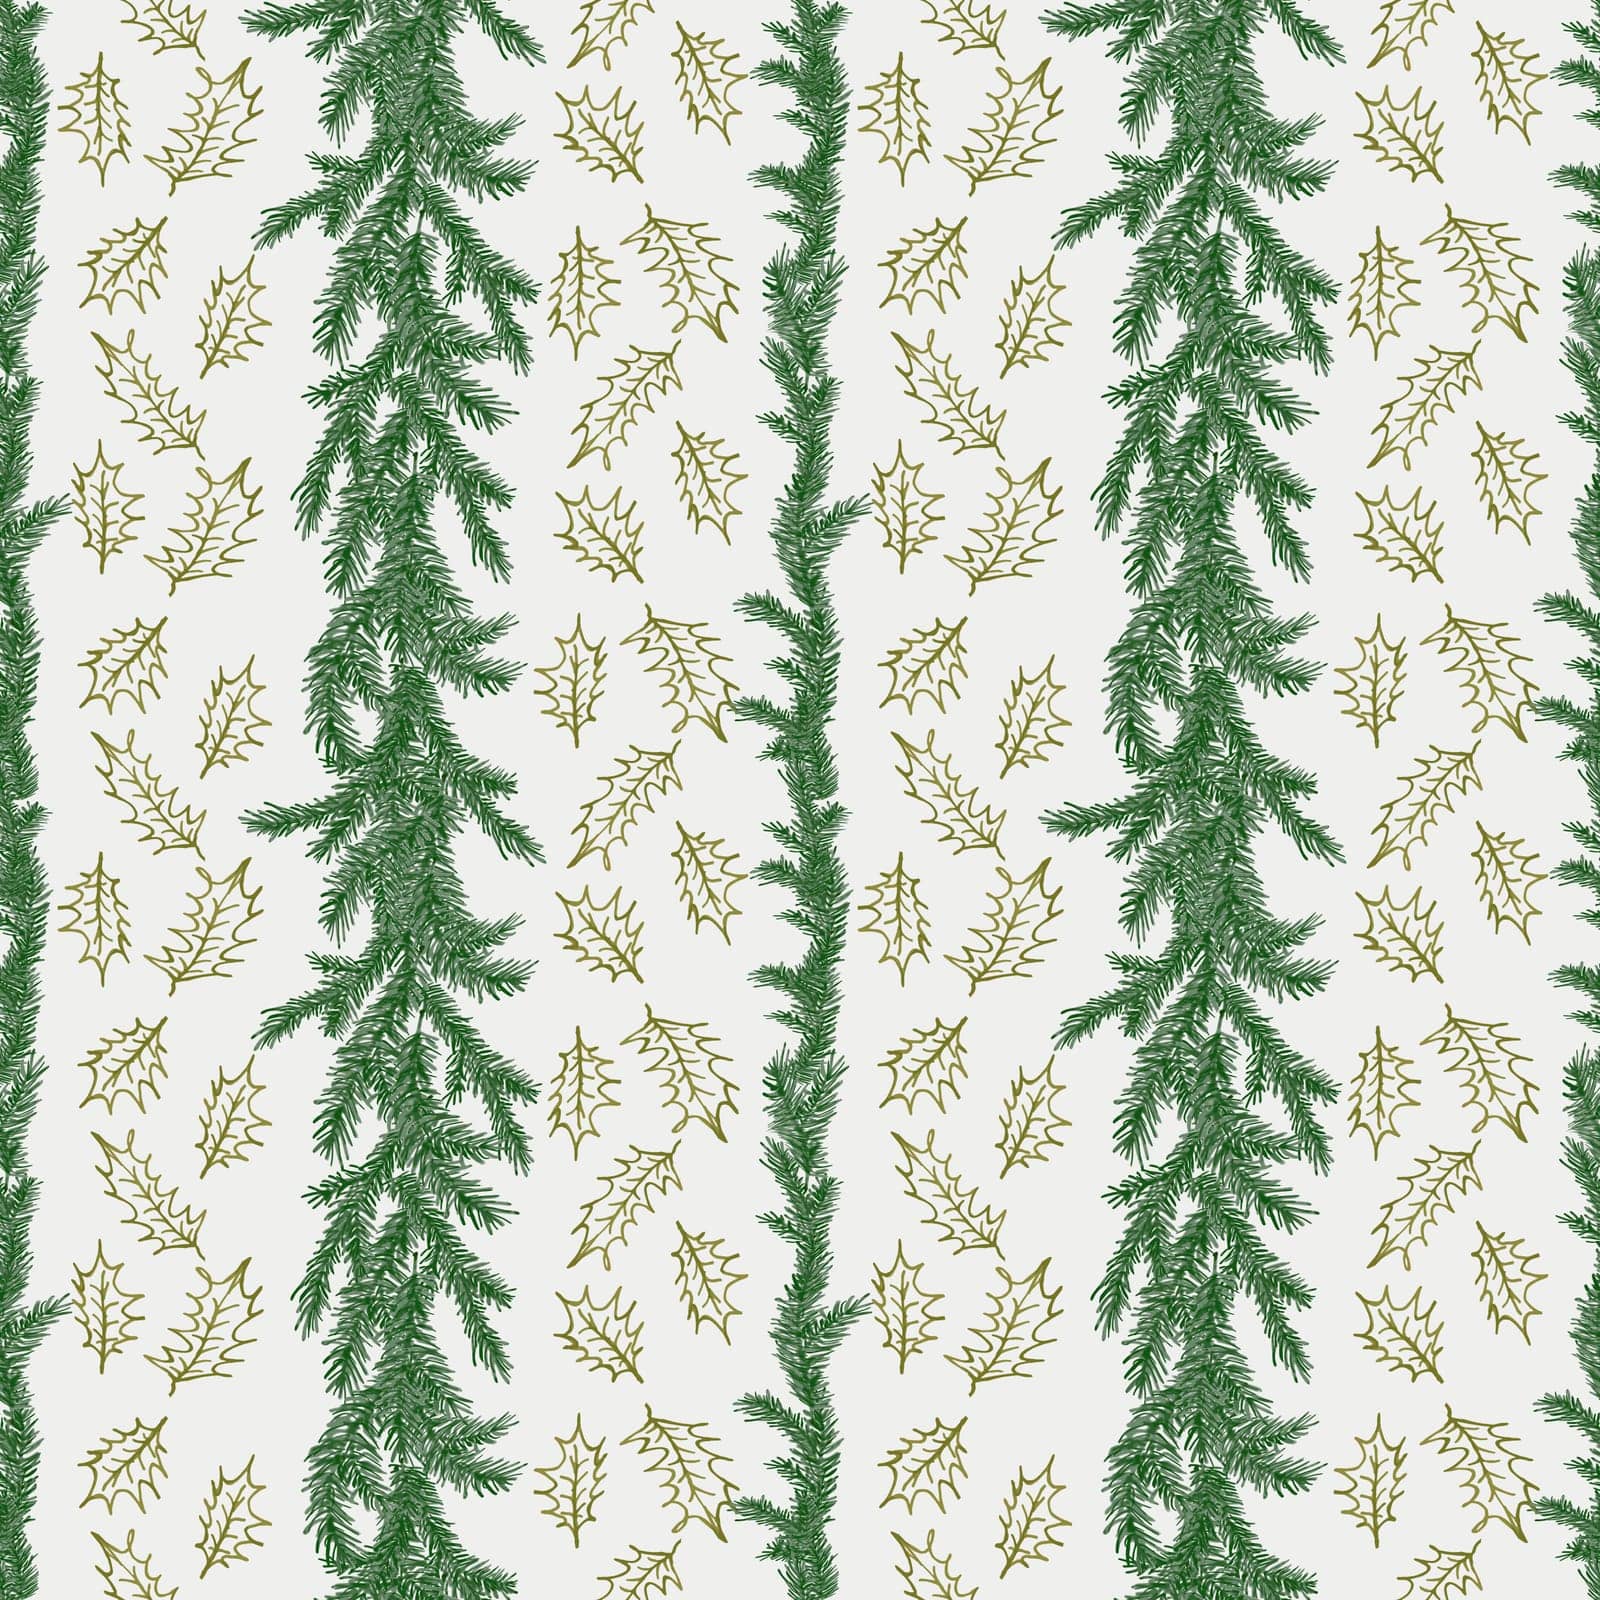 Watercolor seamless pattern with green pine branches and gold holly leaves. Sprig of pine hand drawn for wrapping paper, winter holiday decoration,green and gold. Christmas trees modern background.